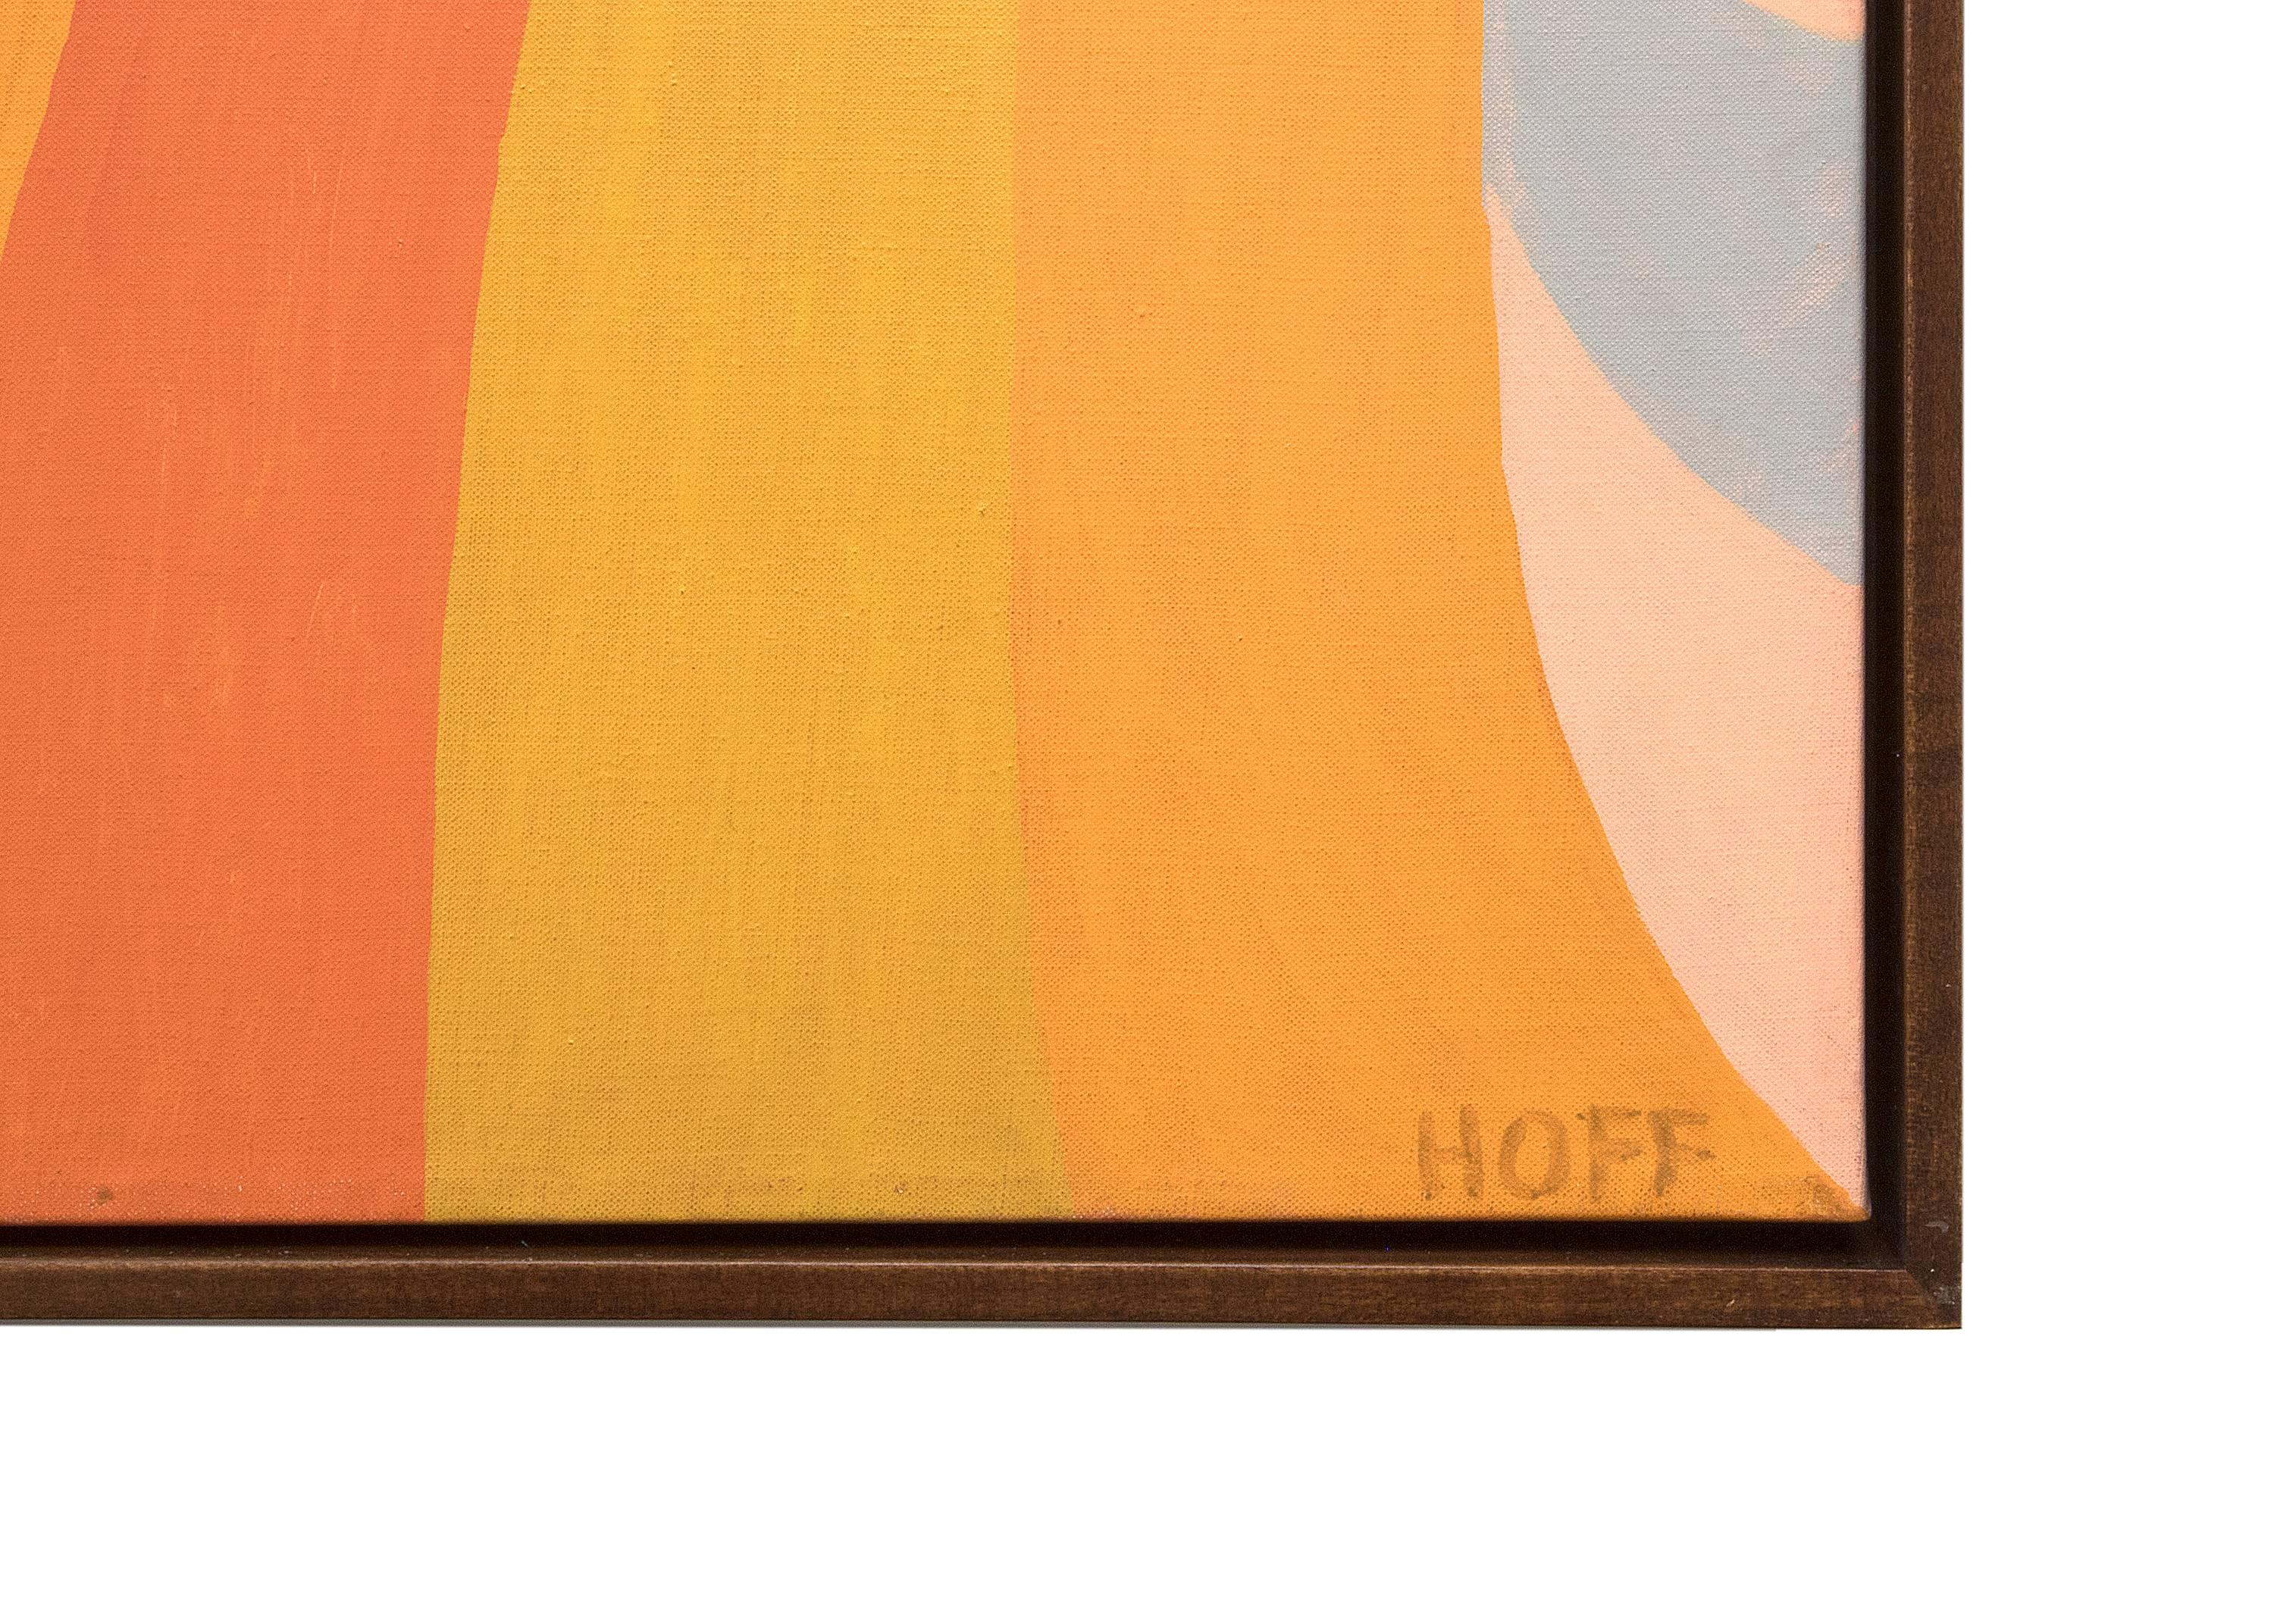 Original oil abstract geometric by female artist, Margo Hoff (1910-2008). Signed by the artist in the lower right corner. Colorful painting in shades of orange, pink, blue, and purple. Presented in a custom frame, outer dimensions measure 46 ¼ x 37